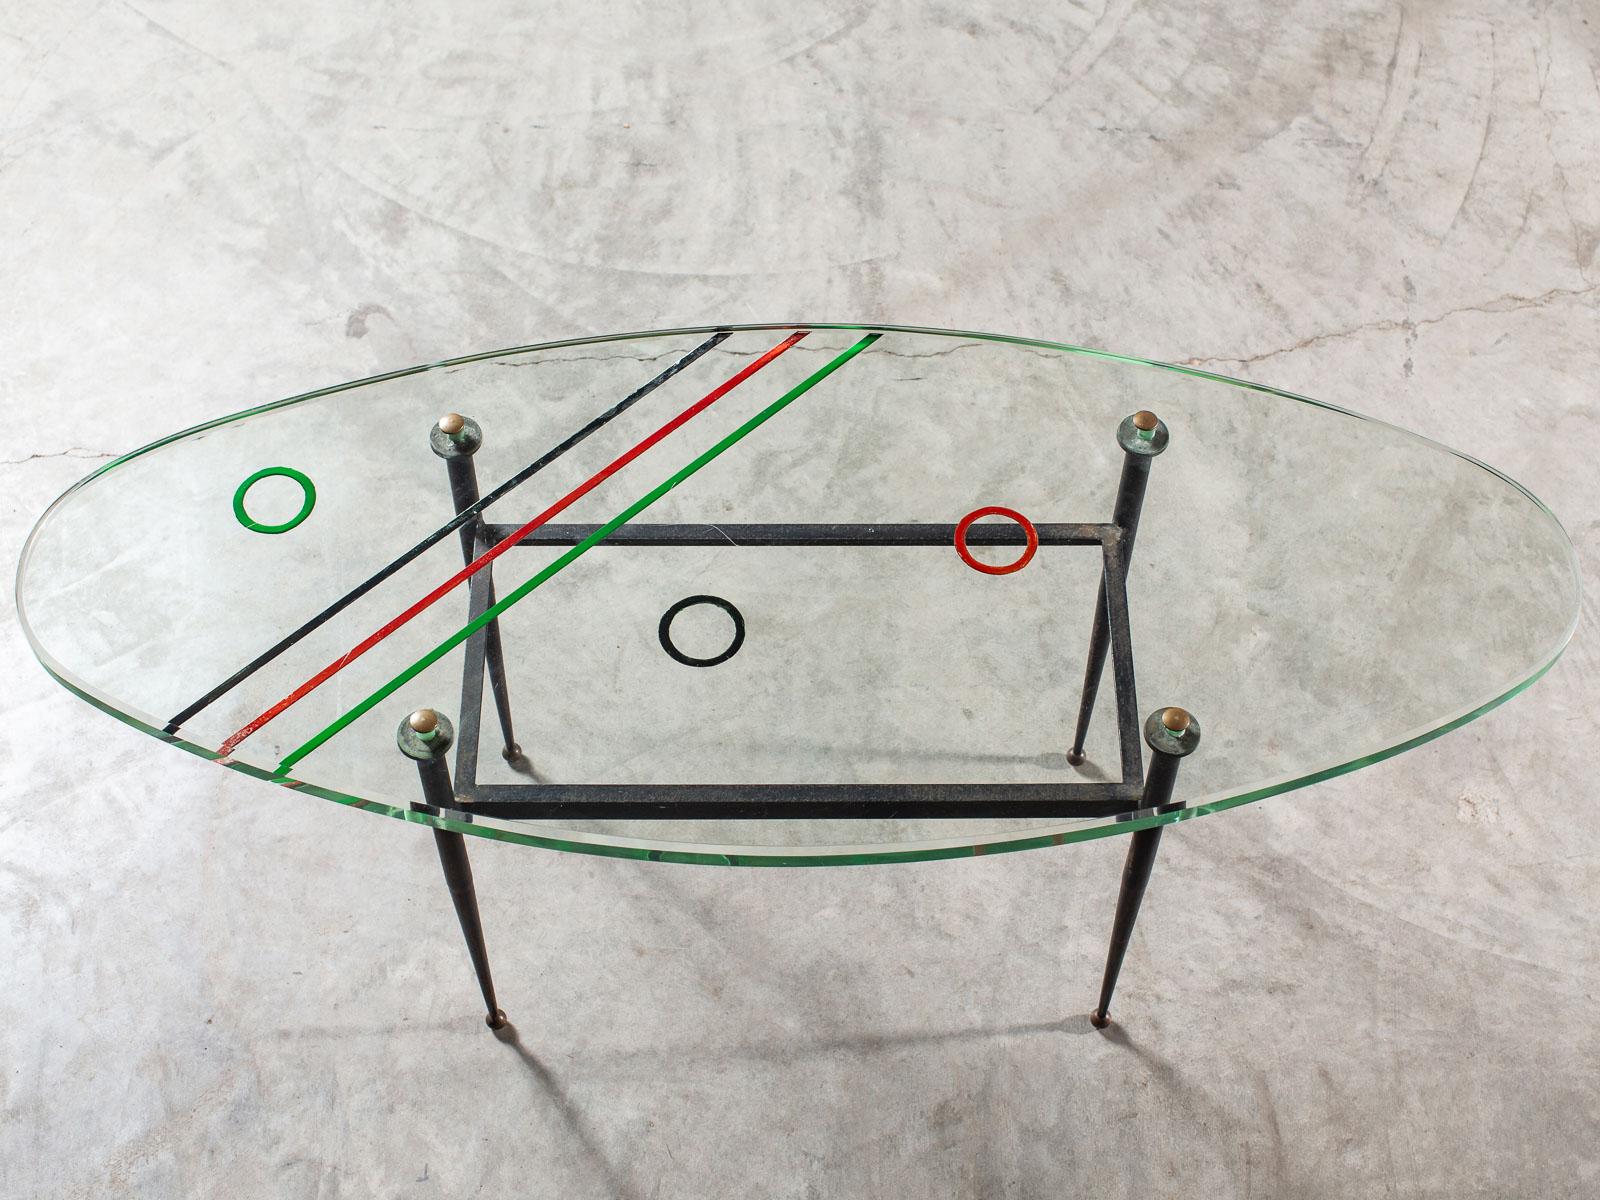 This vintage oval Italian coffee table circa 1960 has an intriguing design. The thick oval glass top has been deeply etched on the underside with a pattern of stripes and circles and then painted in red, green and black. So while it looks as if the